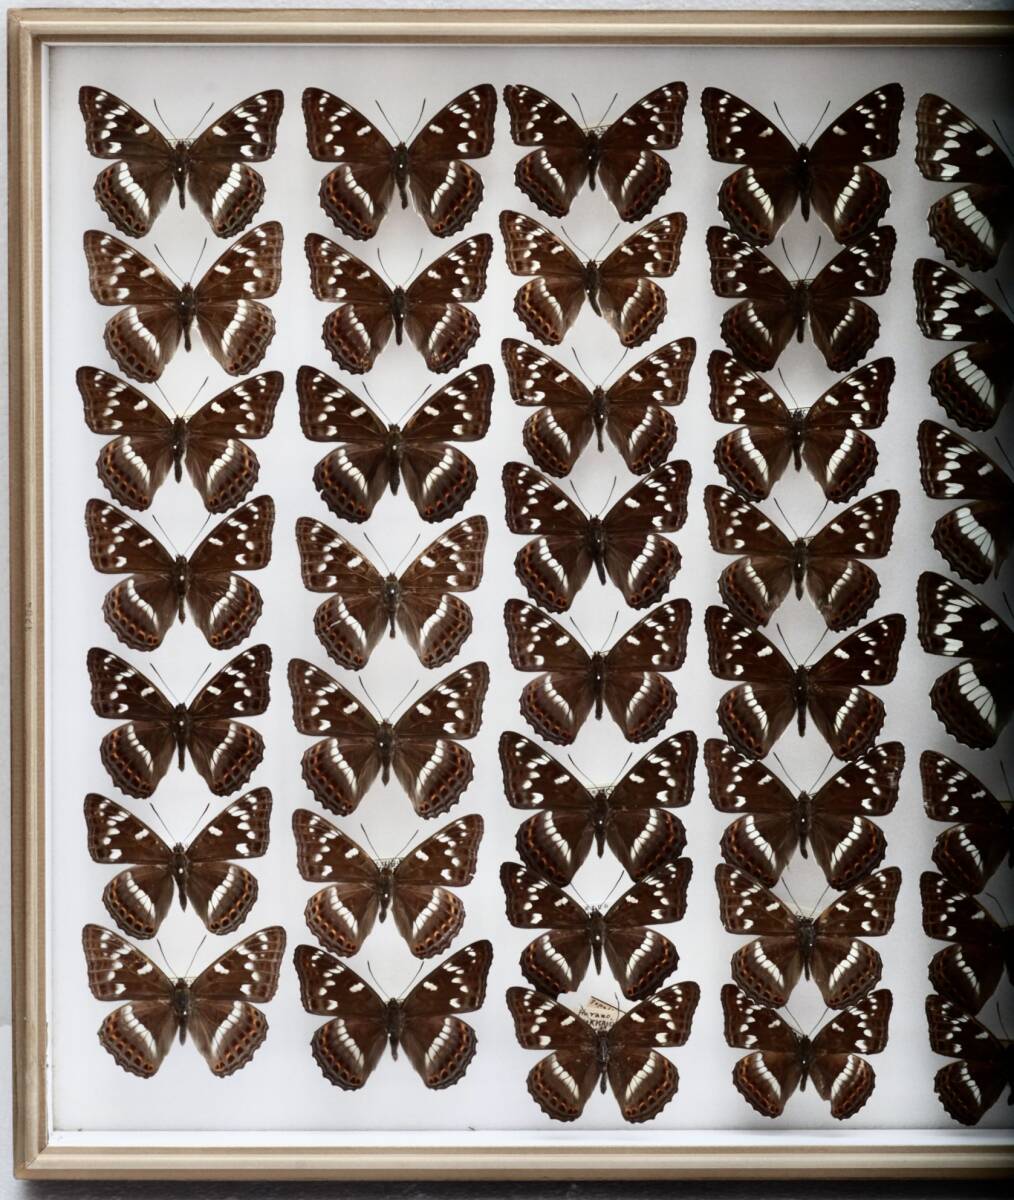  butterfly specimen domestic production oo ichimonjiLimenitis populi jezoensis collection research for large Germany box field collection goods 